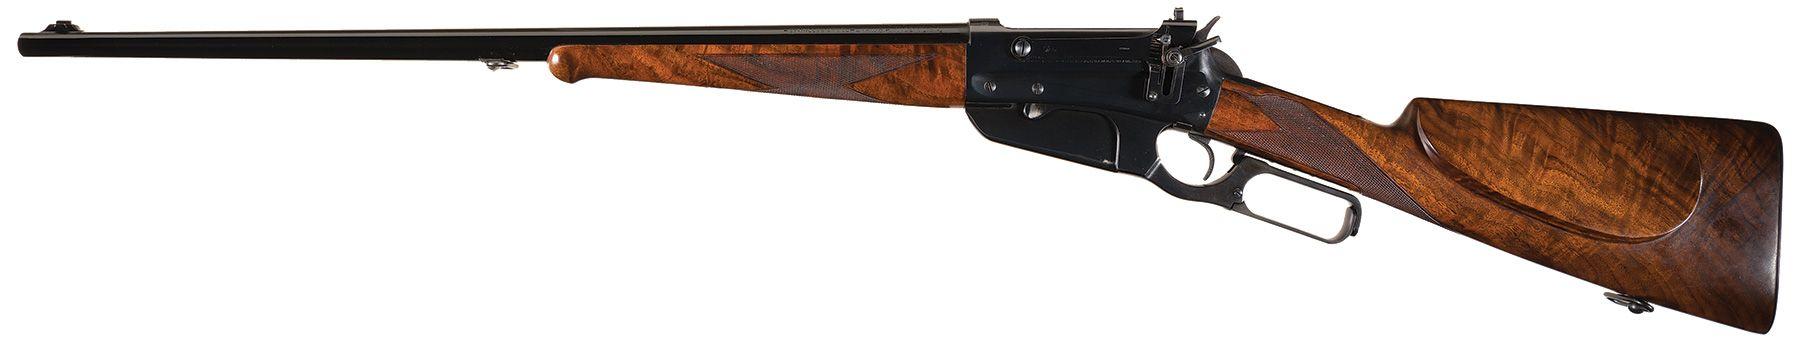 Winchester Deluxe Model 1895 Caliber .405 WCF Rifle